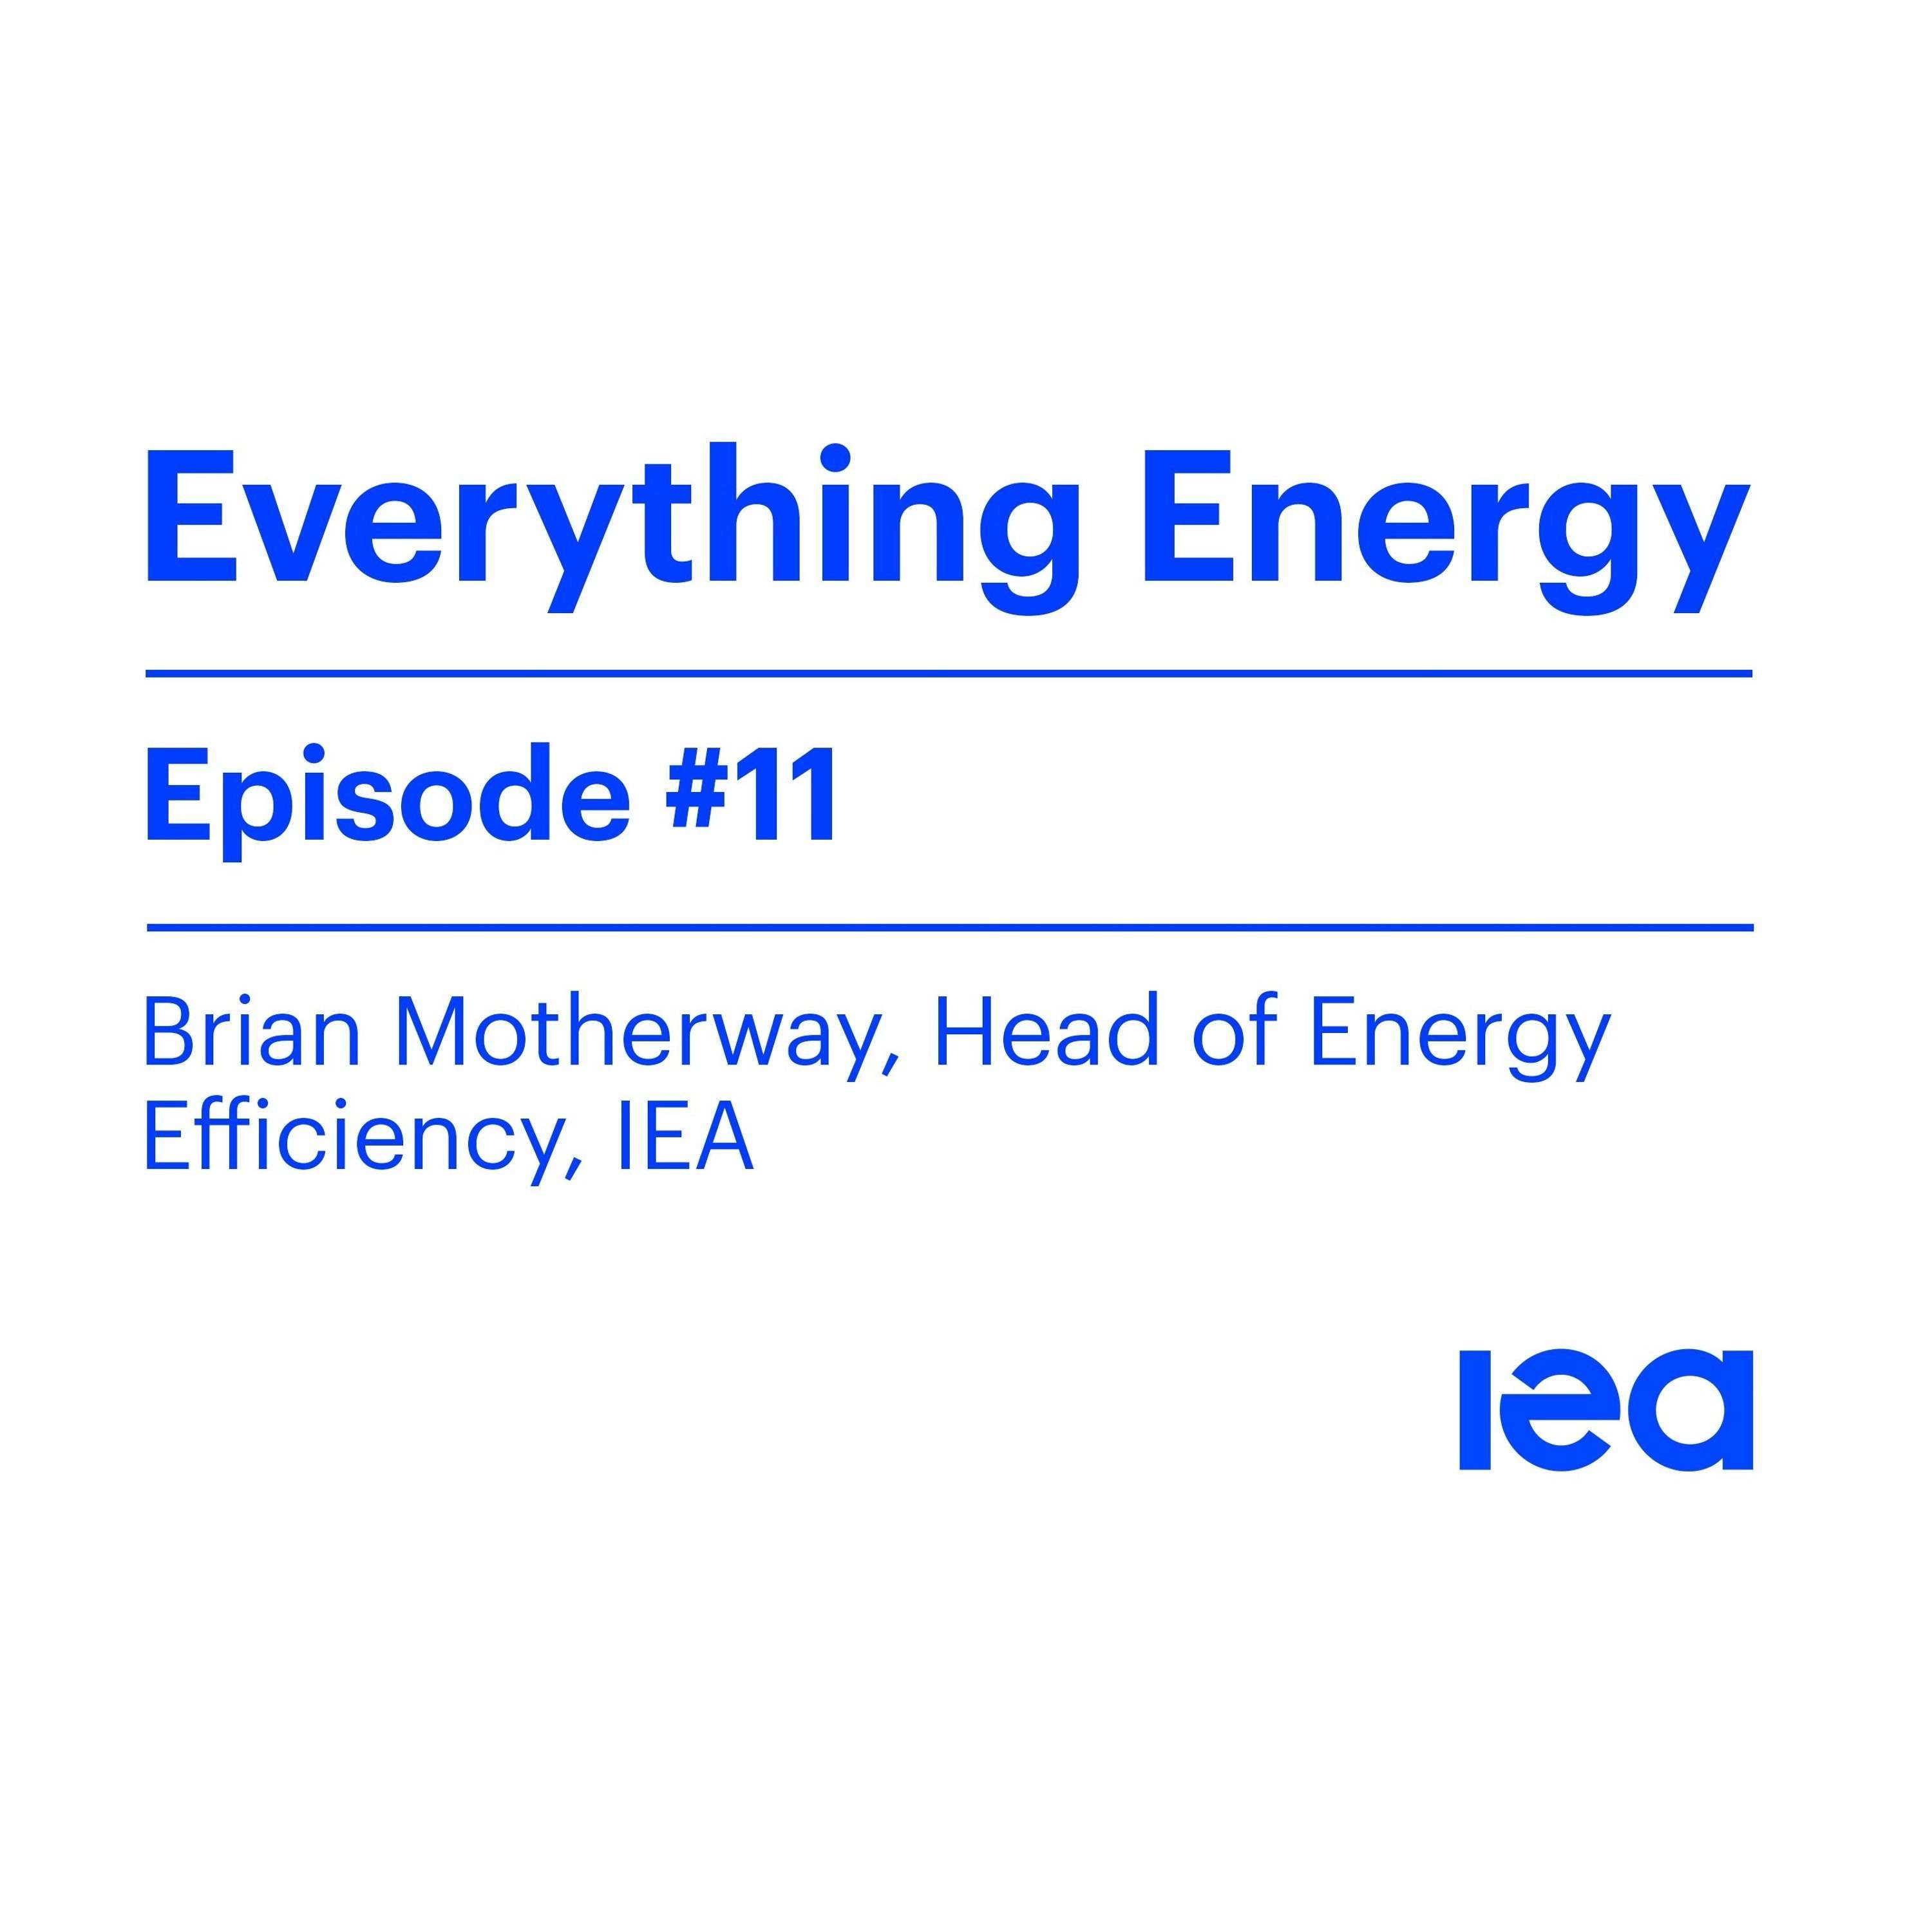 Episode 11: Energy efficiency in 2020 and why we need action now to meet international climate goals